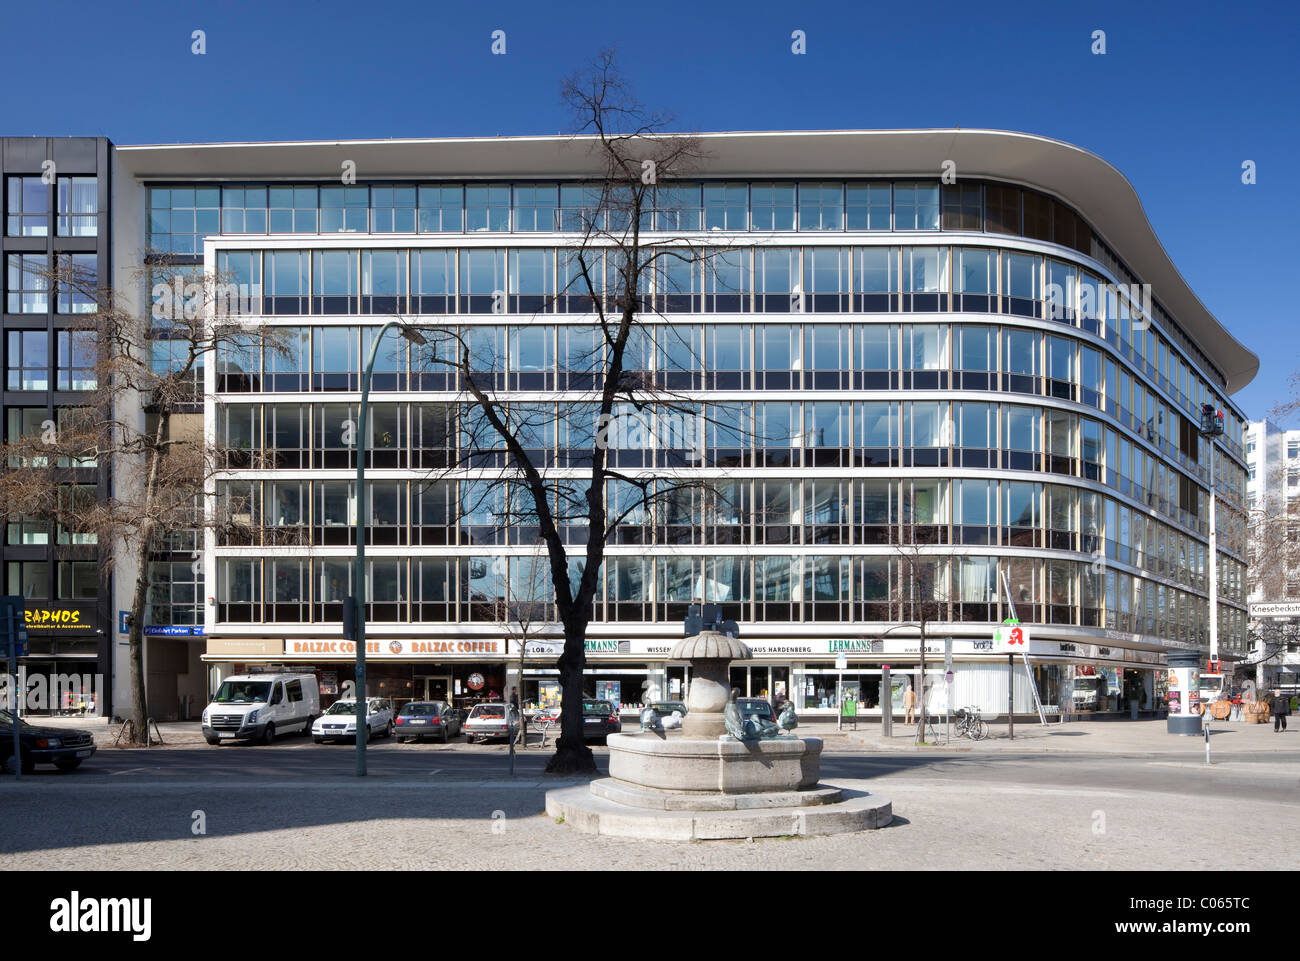 Haus Hardenberg, office and commercial building, Charlottenburg, Berlin, Germany, Europe Stock Photo